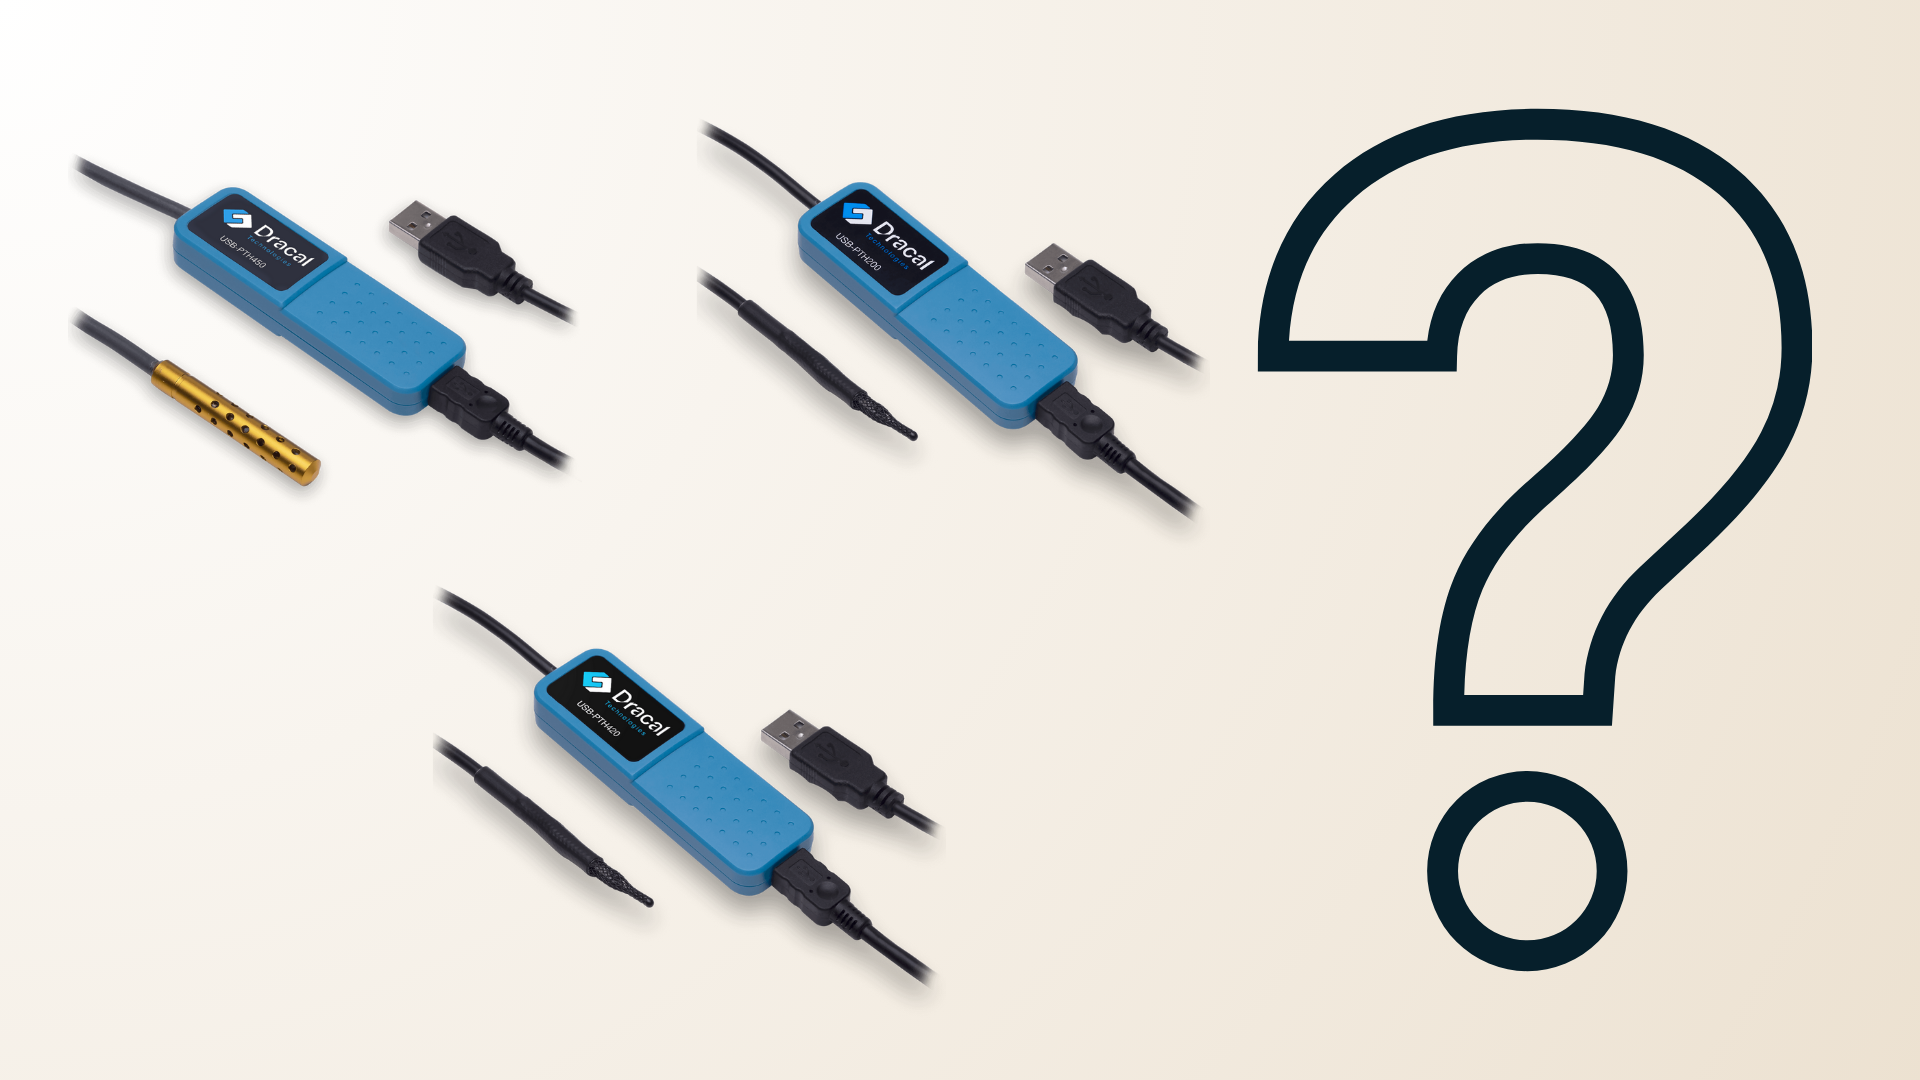 Question mark with all 3 PTH USB sensors available